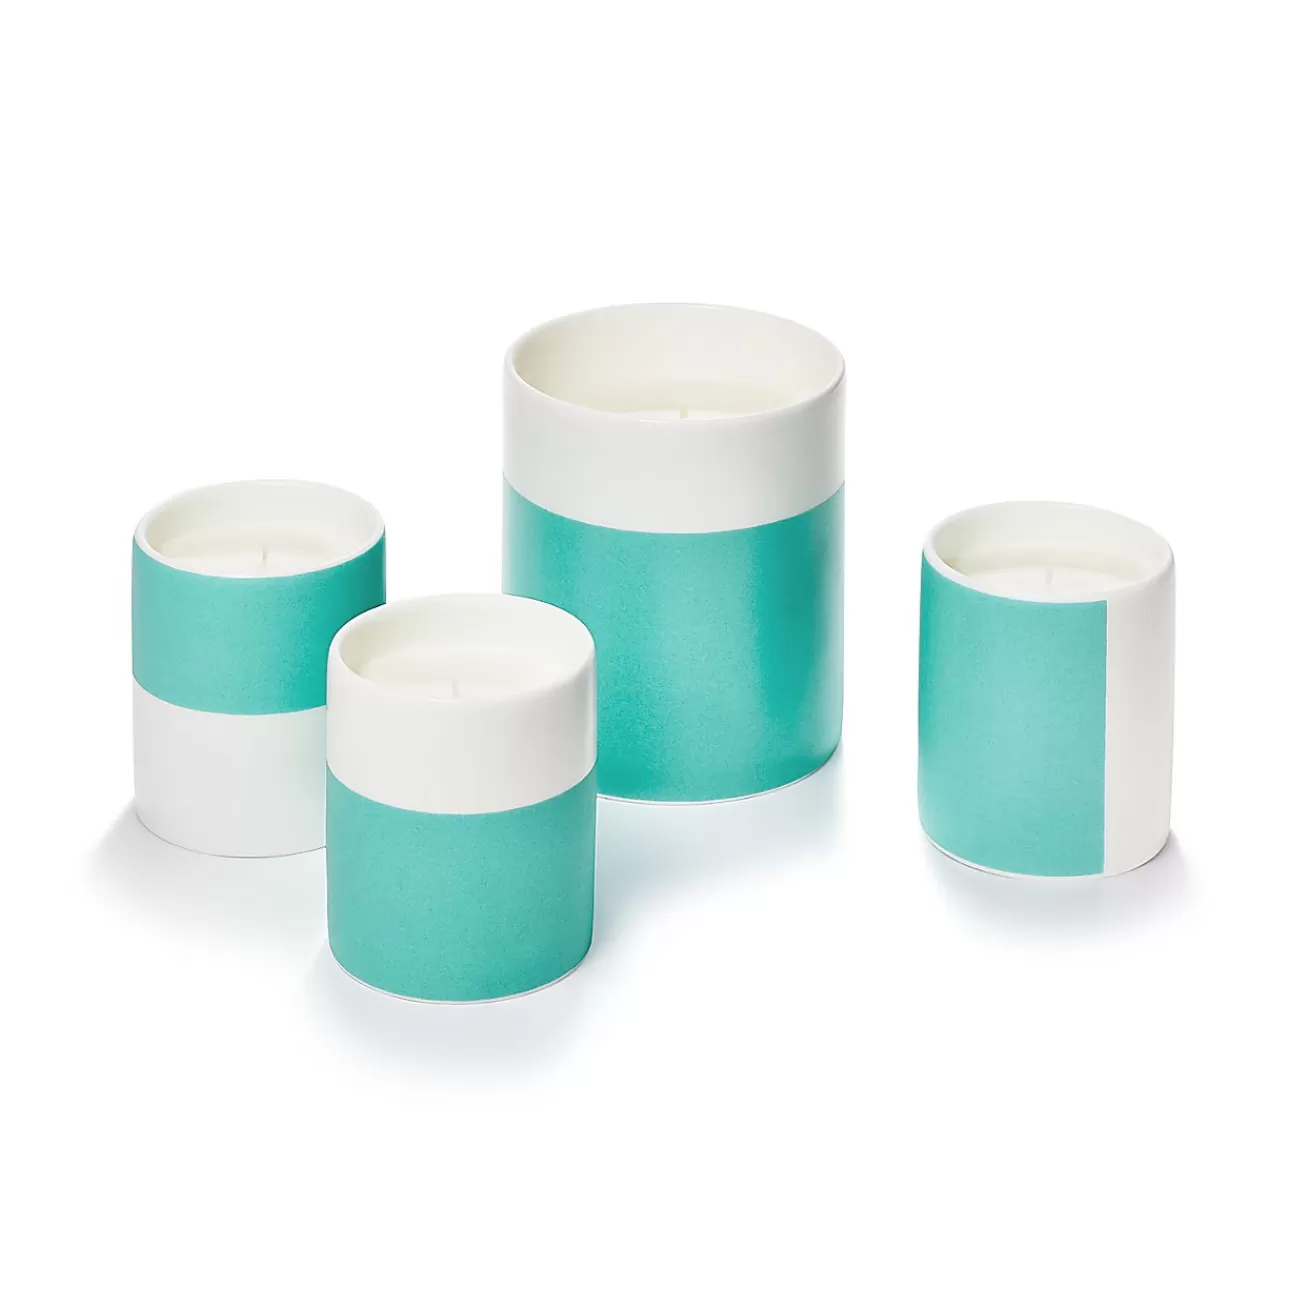 Tiffany & Co. Color Block travel candles in bone china Color Block vessels, set of three. | ^ Decor | Candles